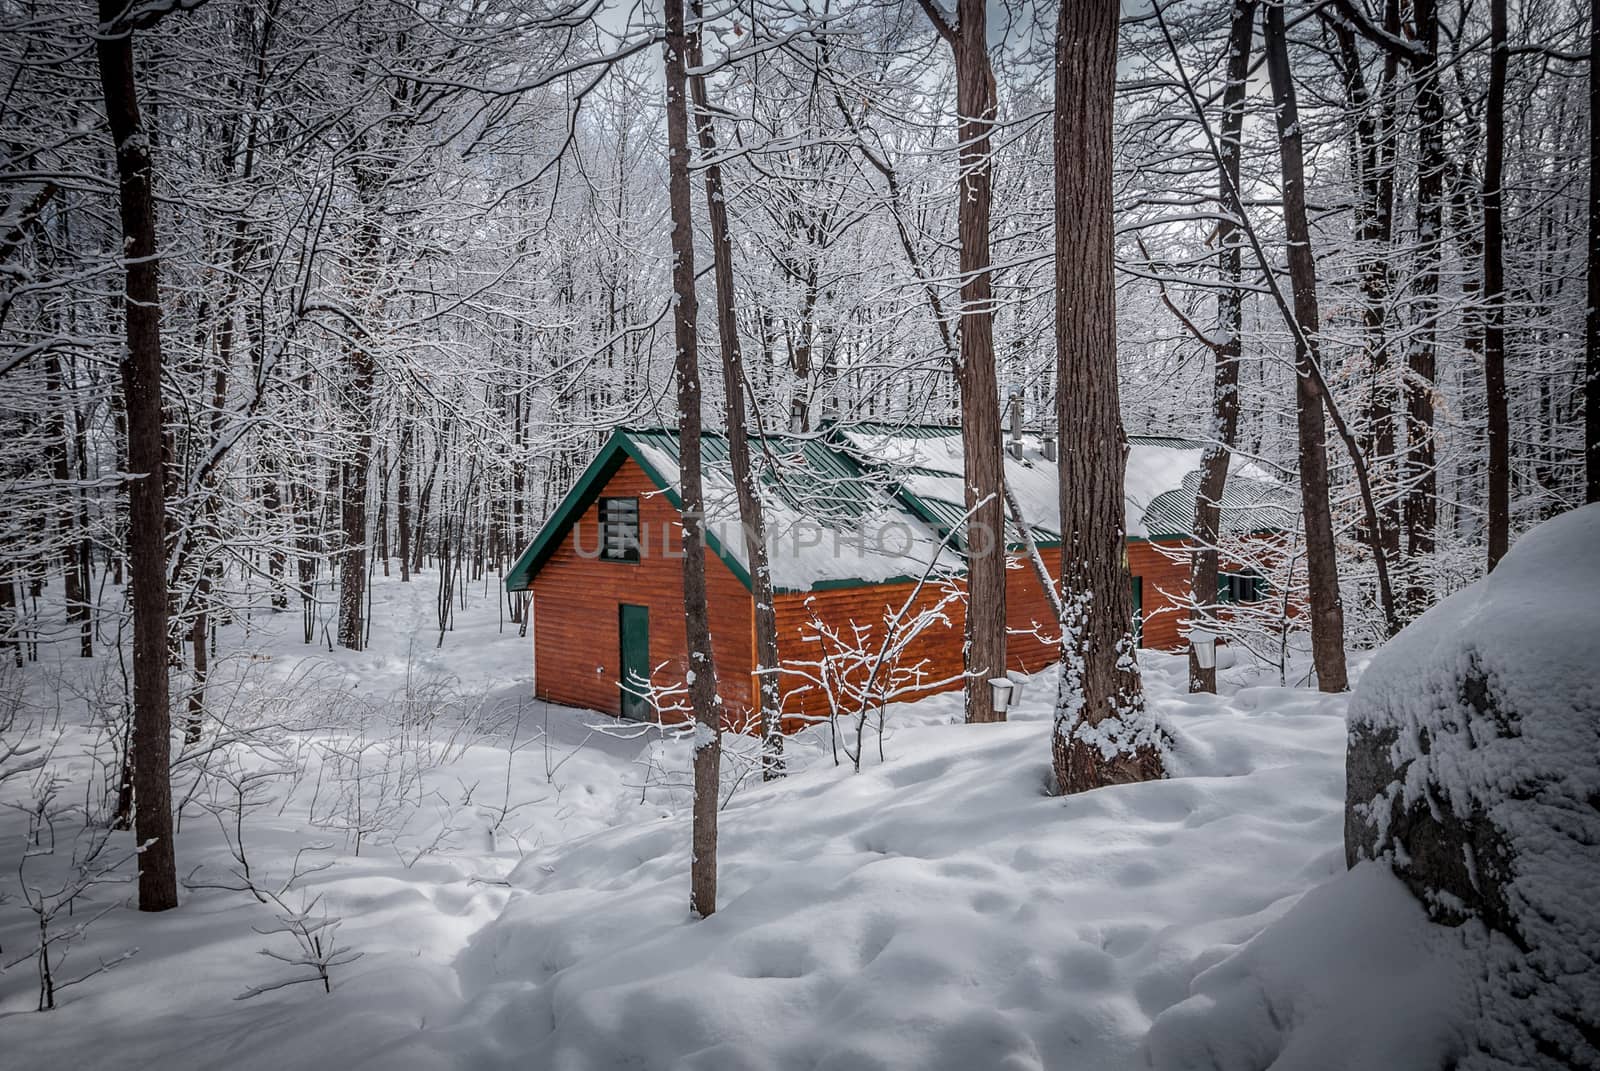 A walk into the maple syrup, sugar shack woods just as the season gets started.